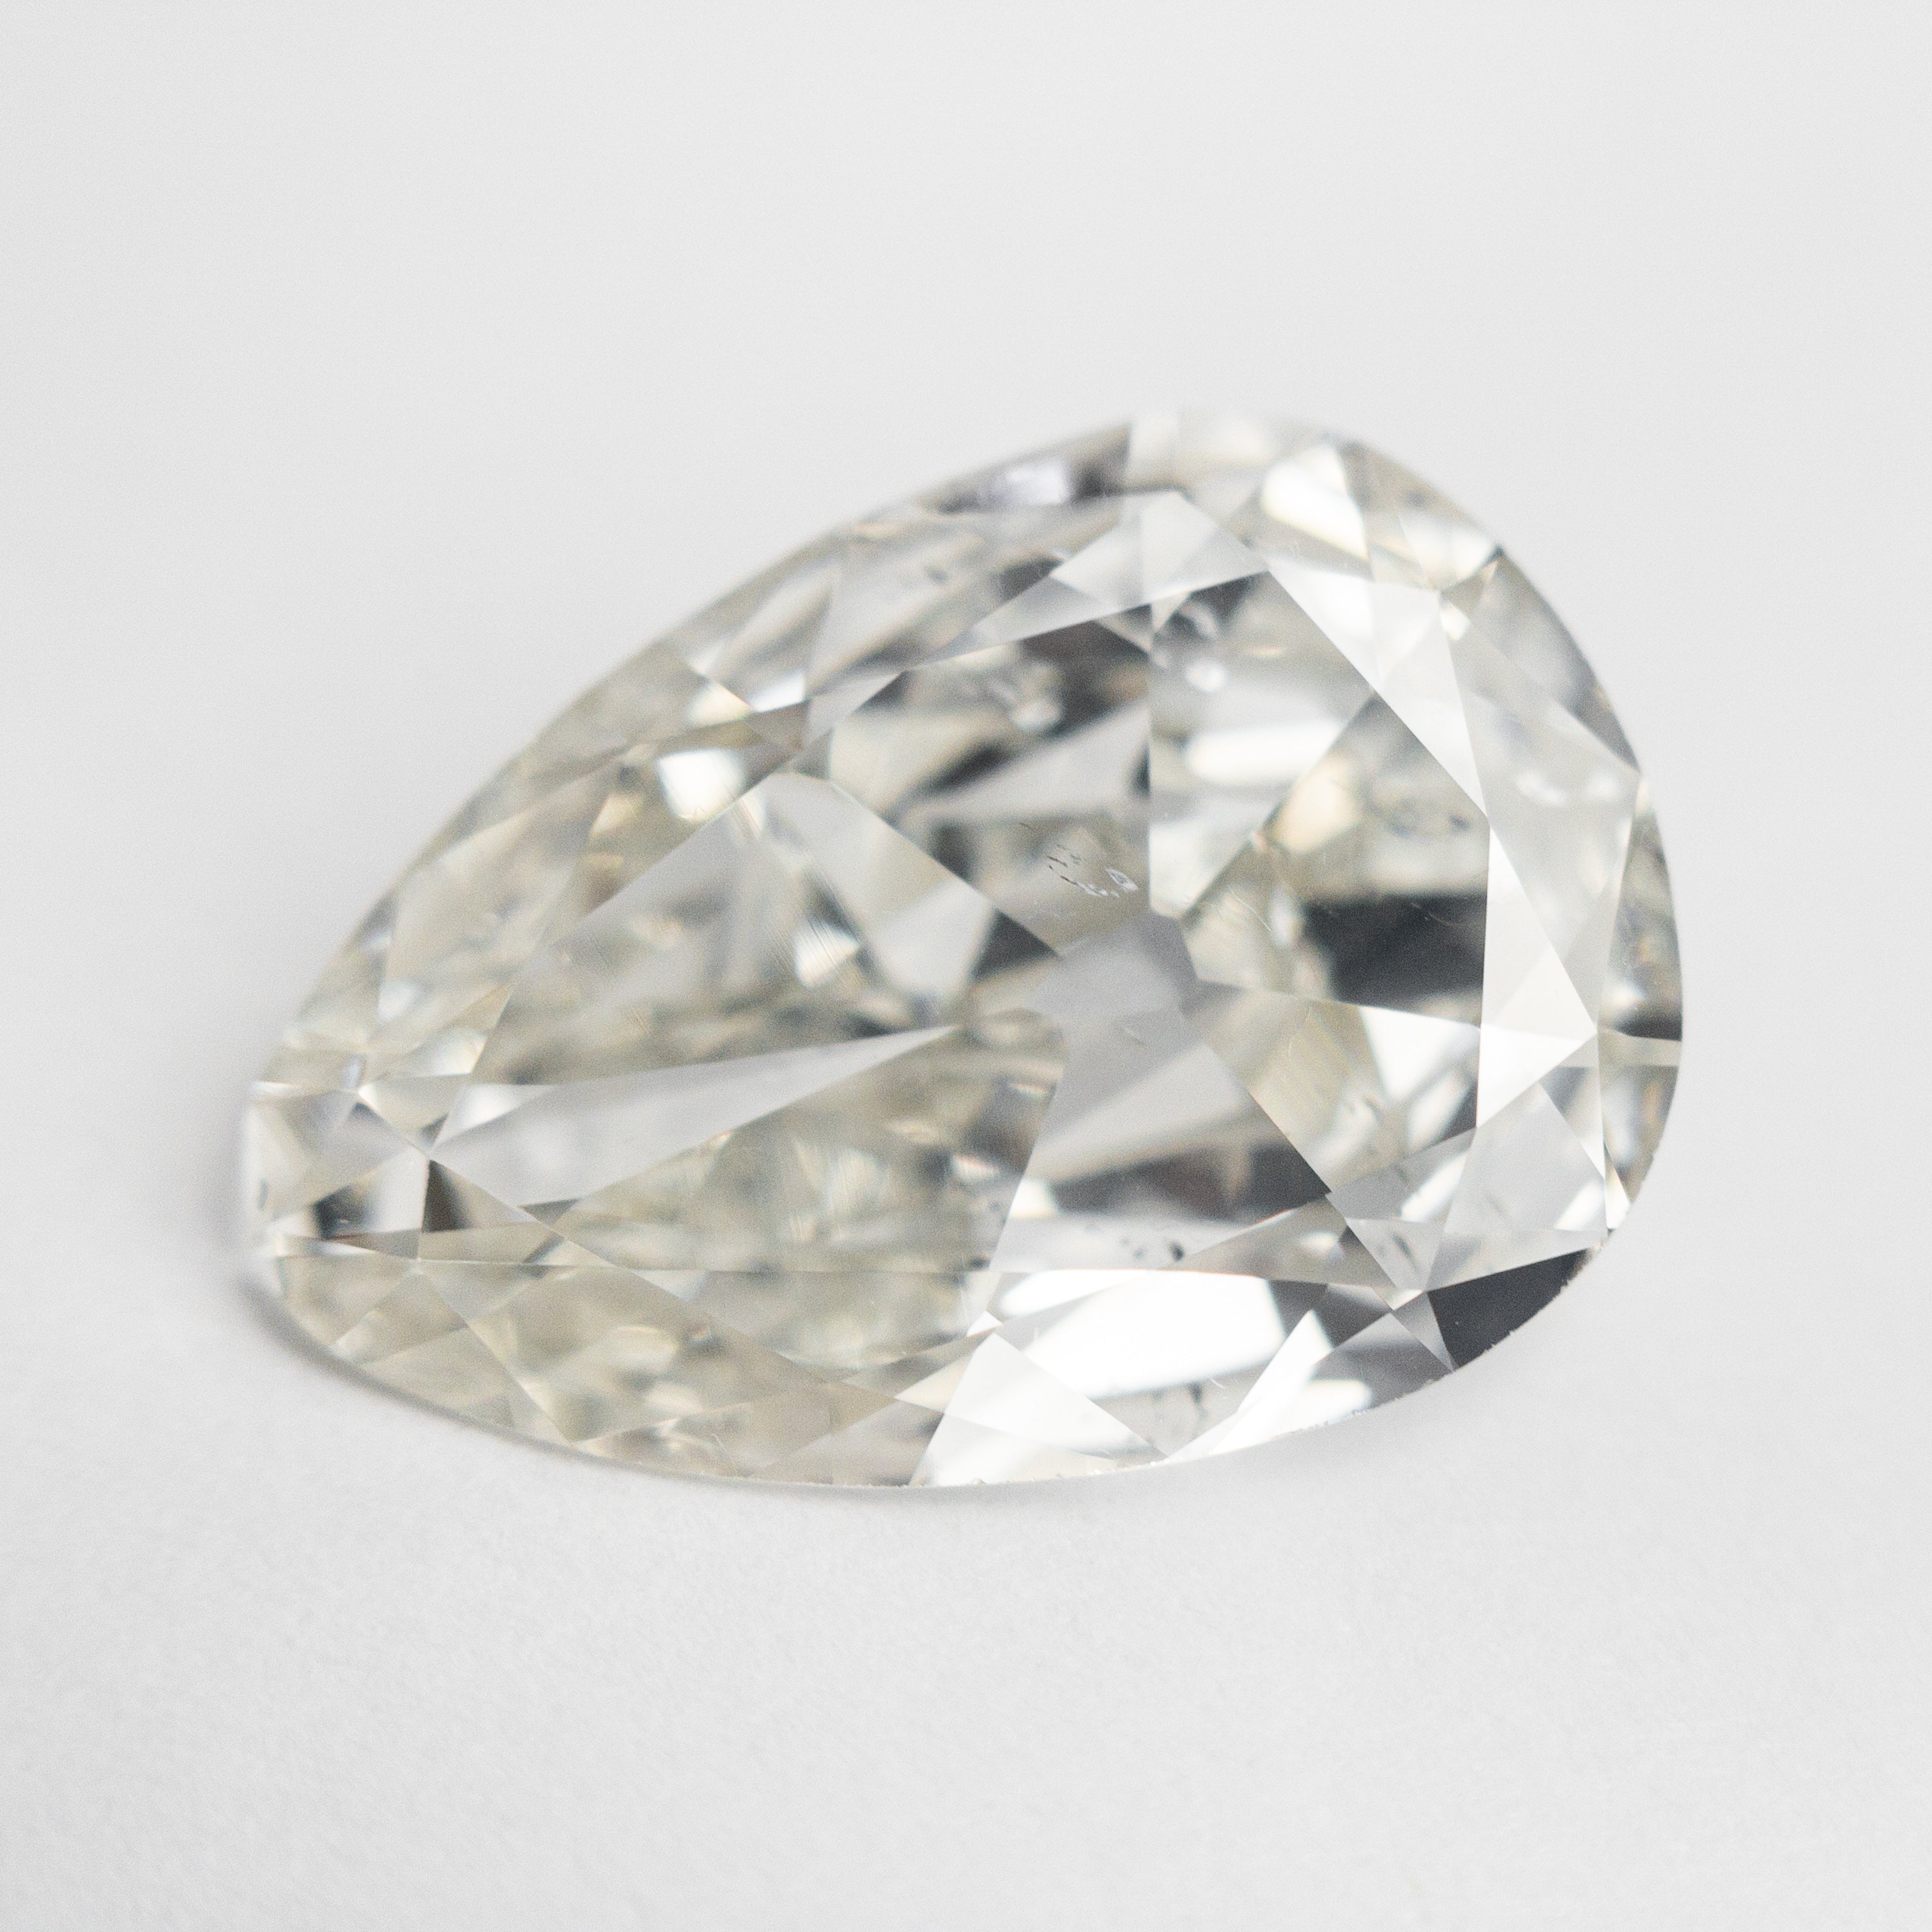 The 4.32ct 14.64x10.39x4.28mm GIA SI2 J Antique Pear Old Mine Cut 20672-01 by East London jeweller Rachel Boston | Discover our collections of unique and timeless engagement rings, wedding rings, and modern fine jewellery.